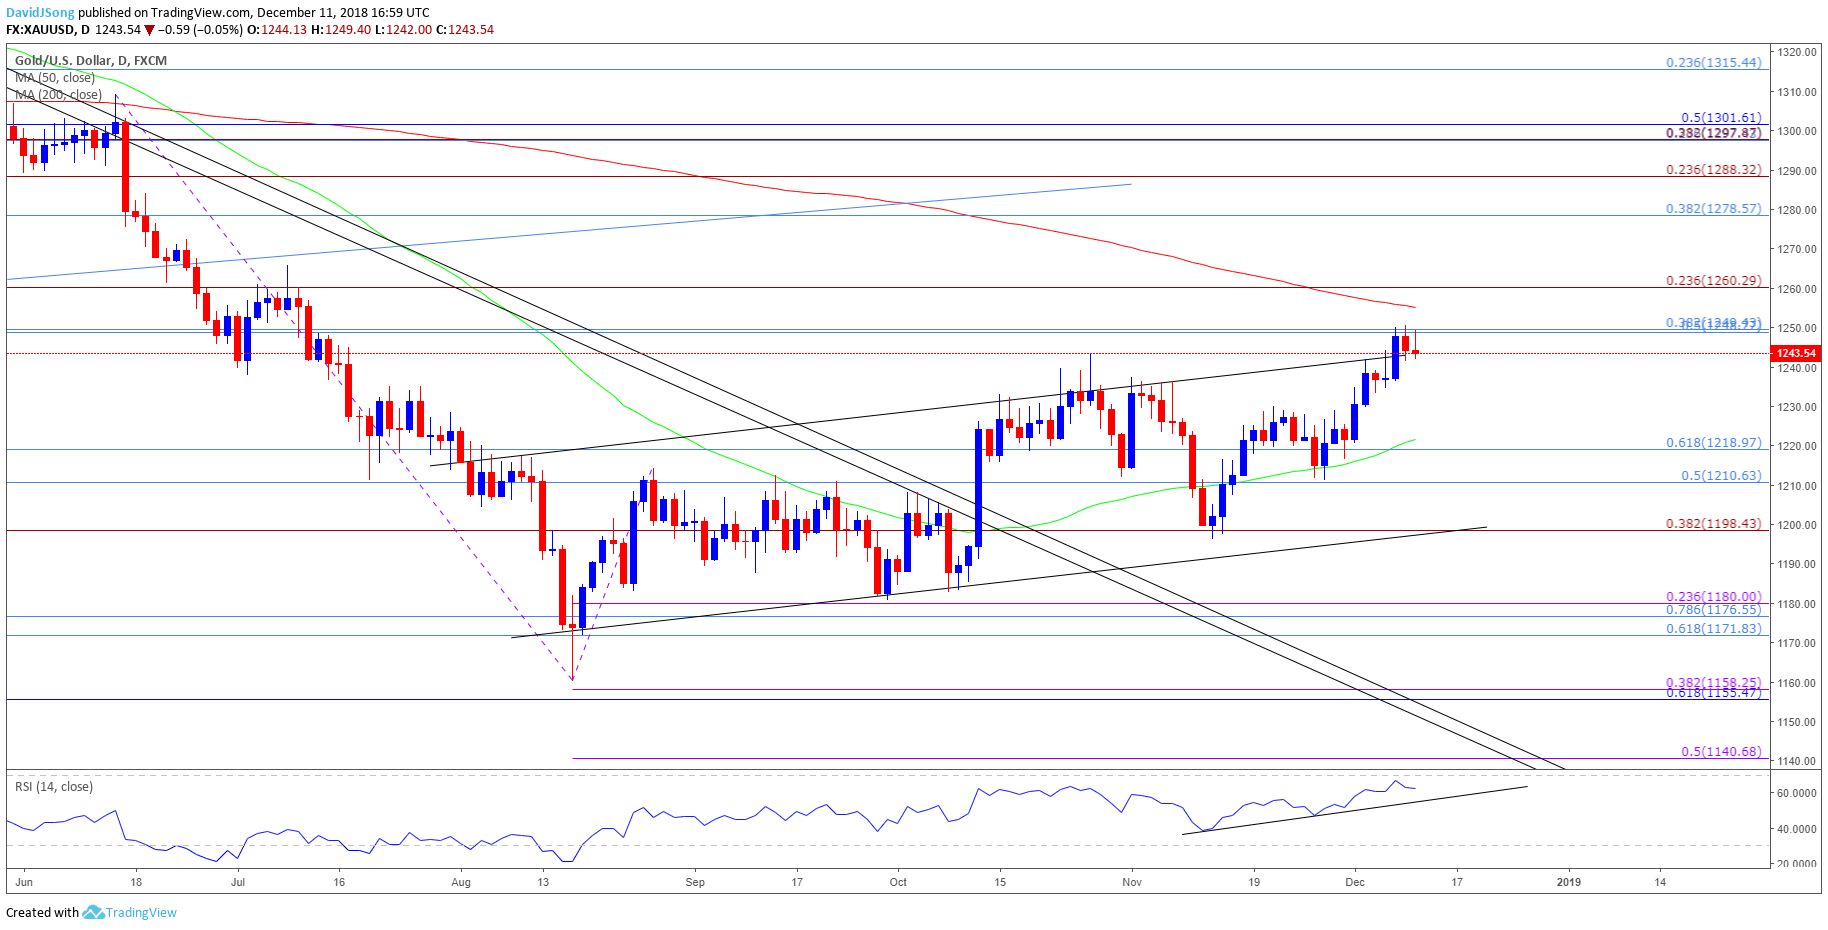 Image of gold daily chart